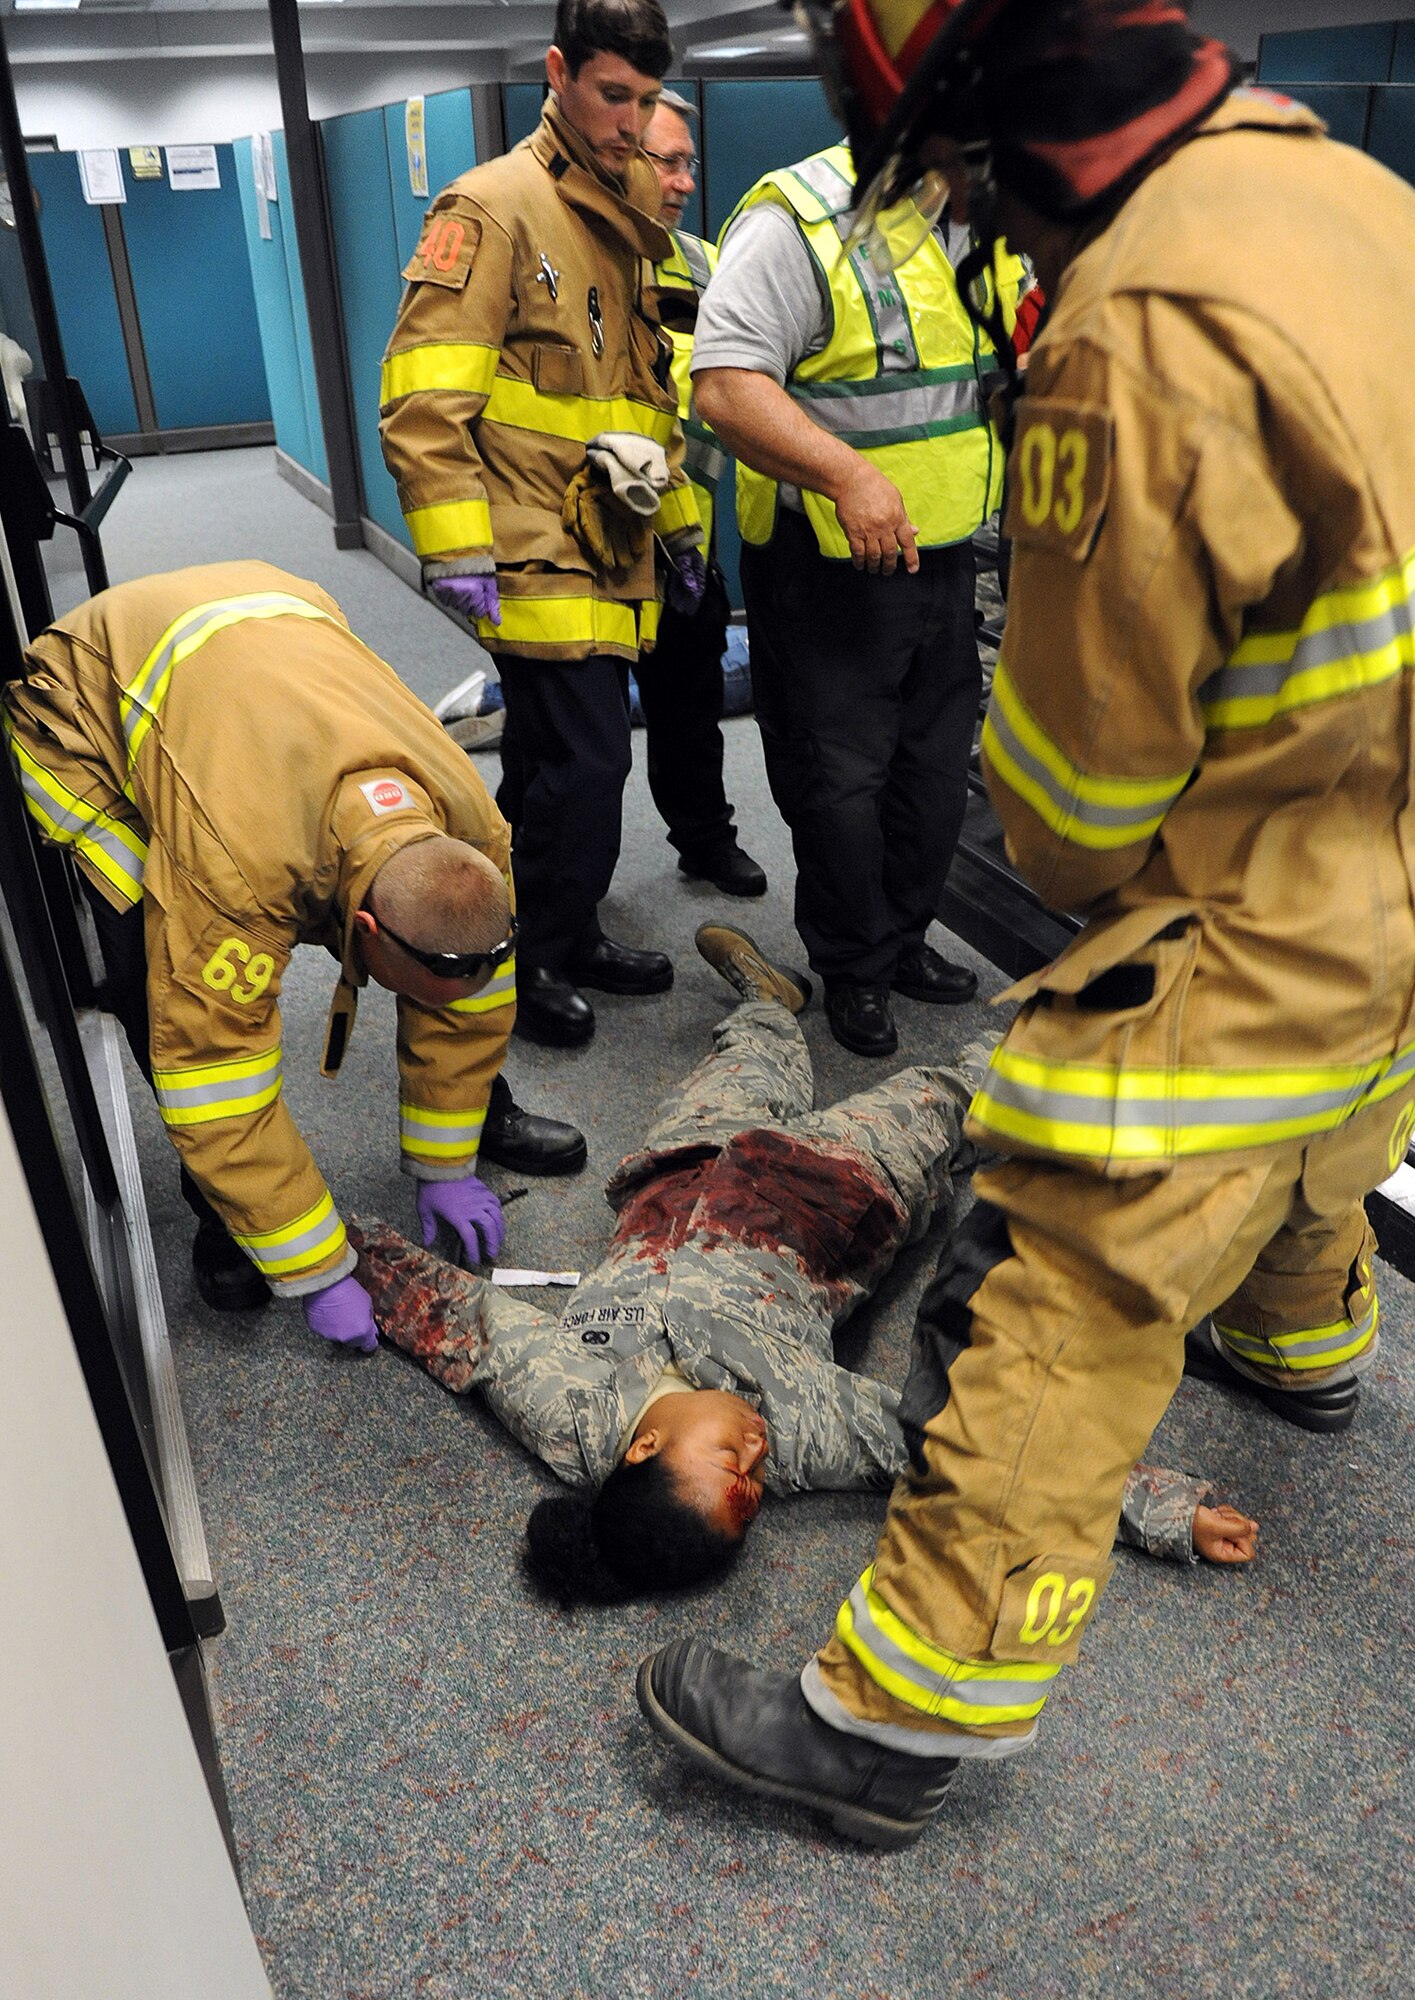 Team Robins conducted a series of exercises last week which included an active-shooter scenario involving airmen who were moulaged to portray victims. Shown here, first responders attend to simulated victims. (U.S. Air Force photo by Tommie Horton)